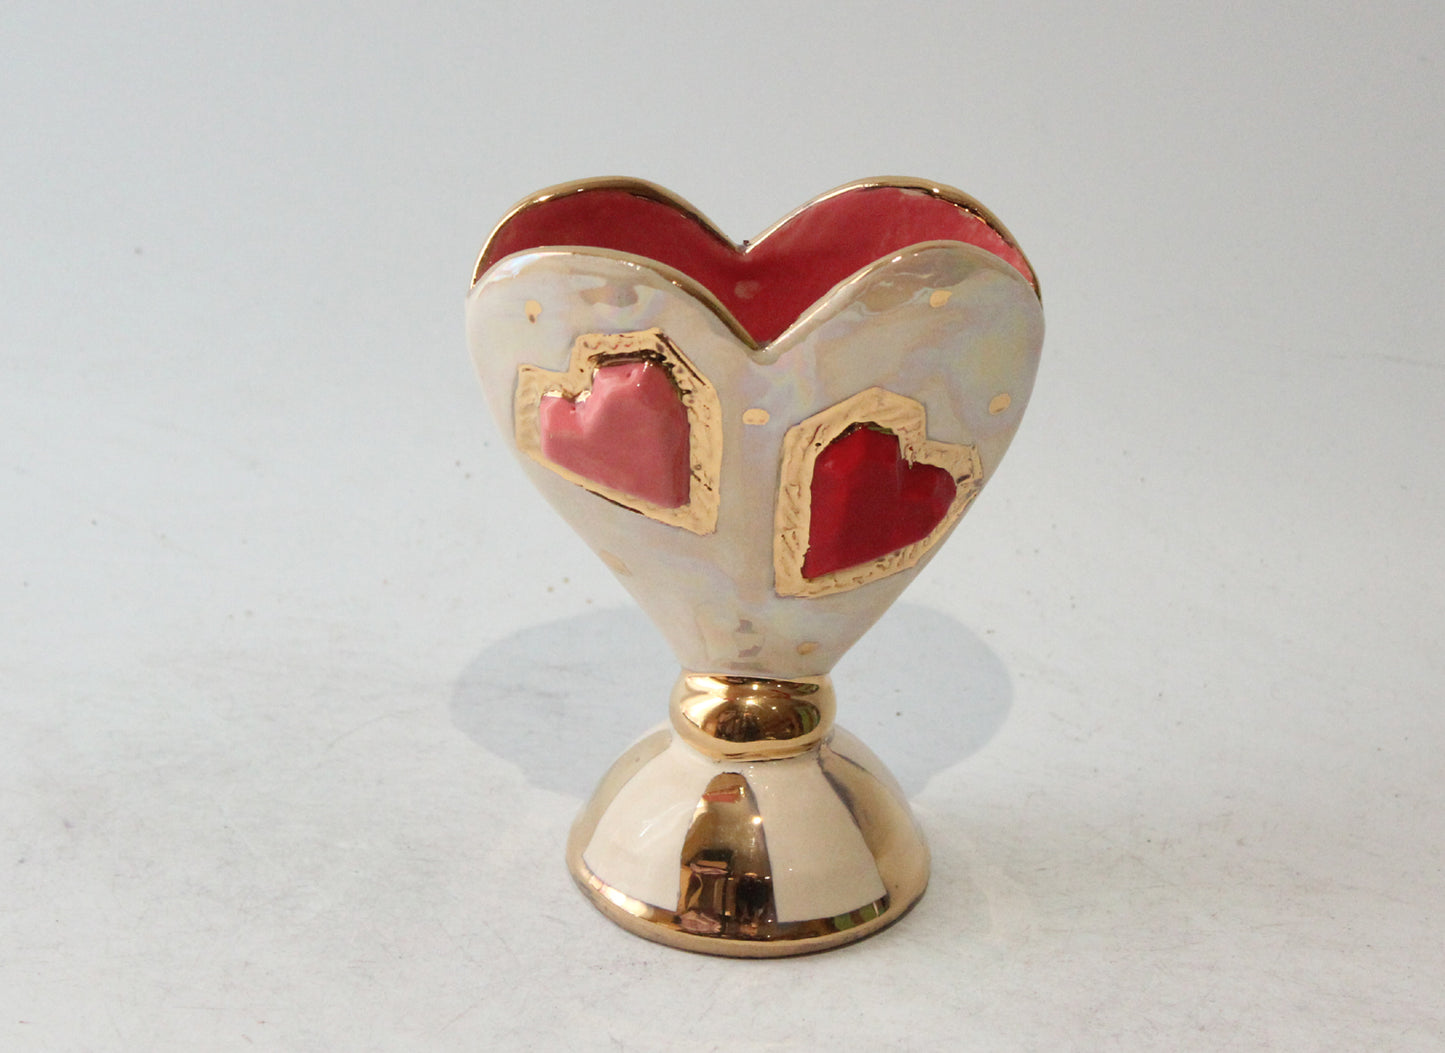 Baby Heart Vase with Studded Hearts